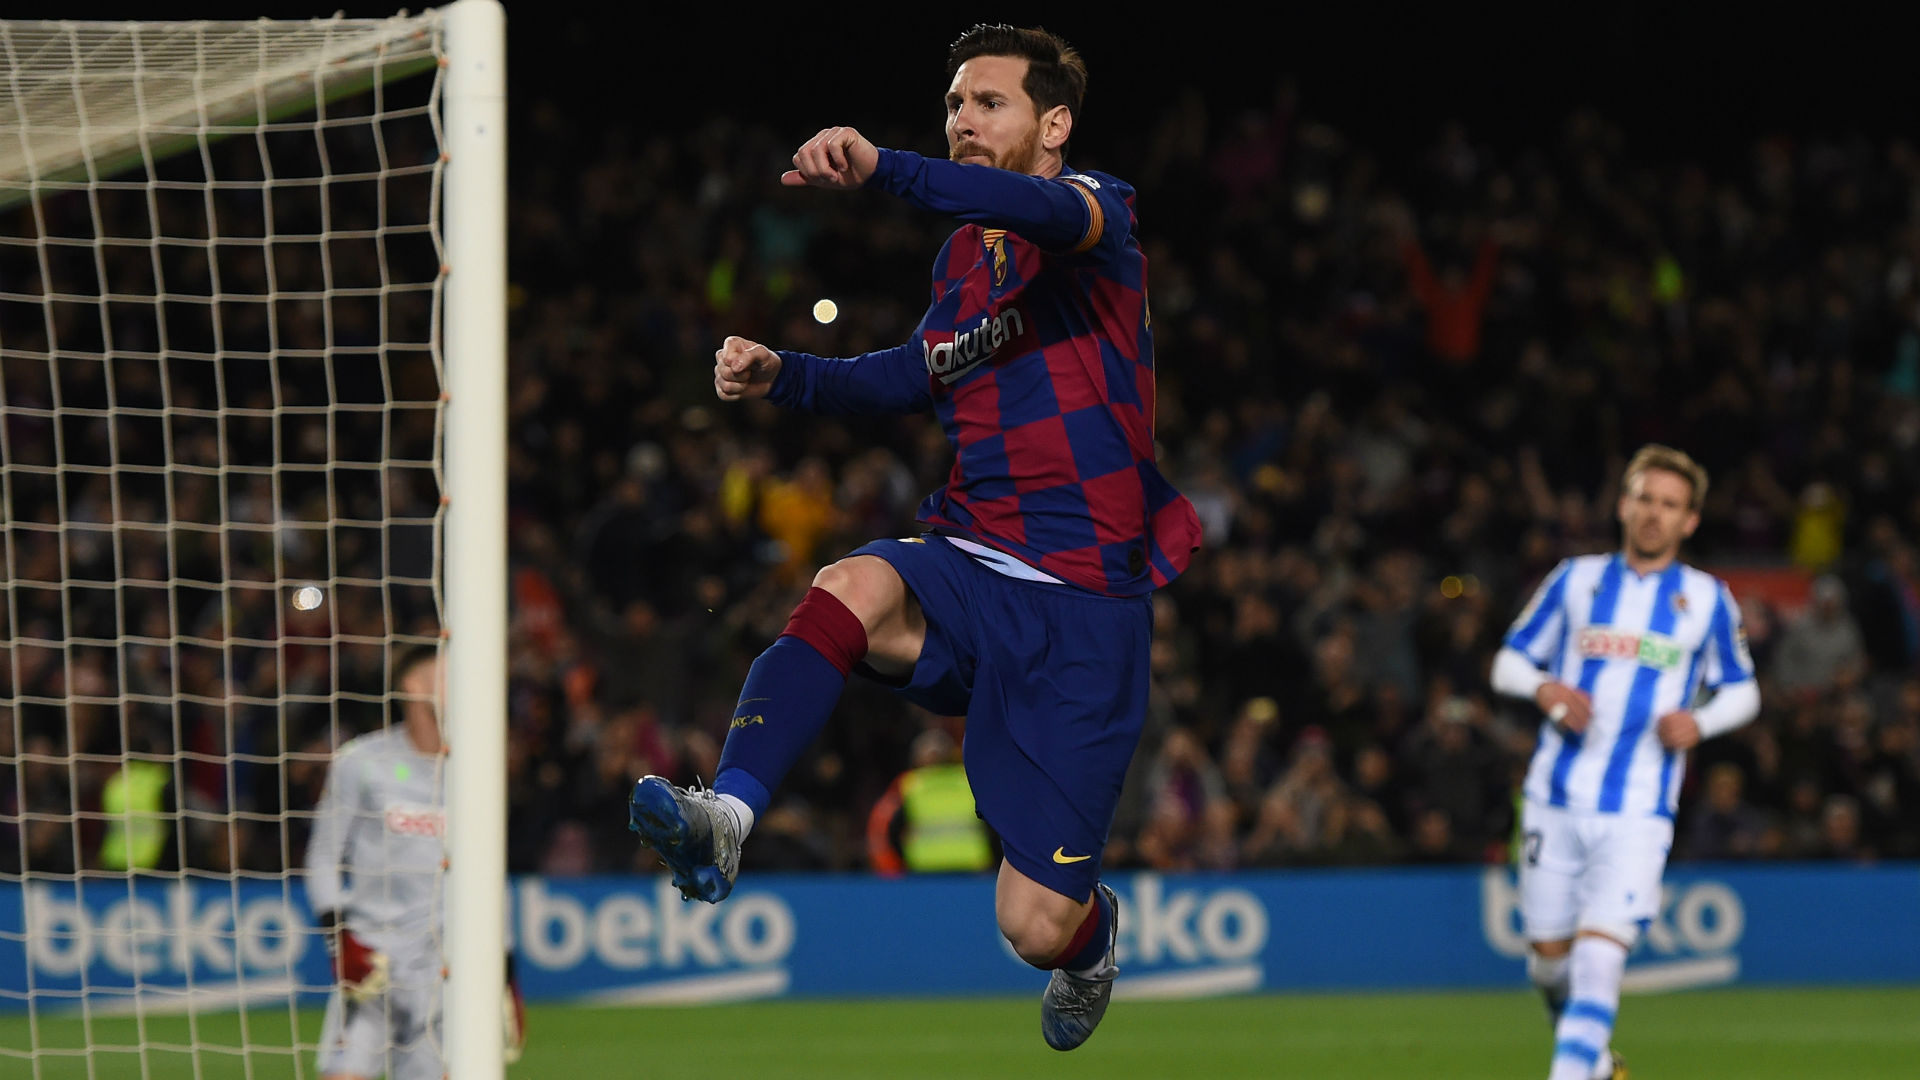 With Lionel Messi coming out of contract next year, Barcelona are set to open talks to extend the star's deal.